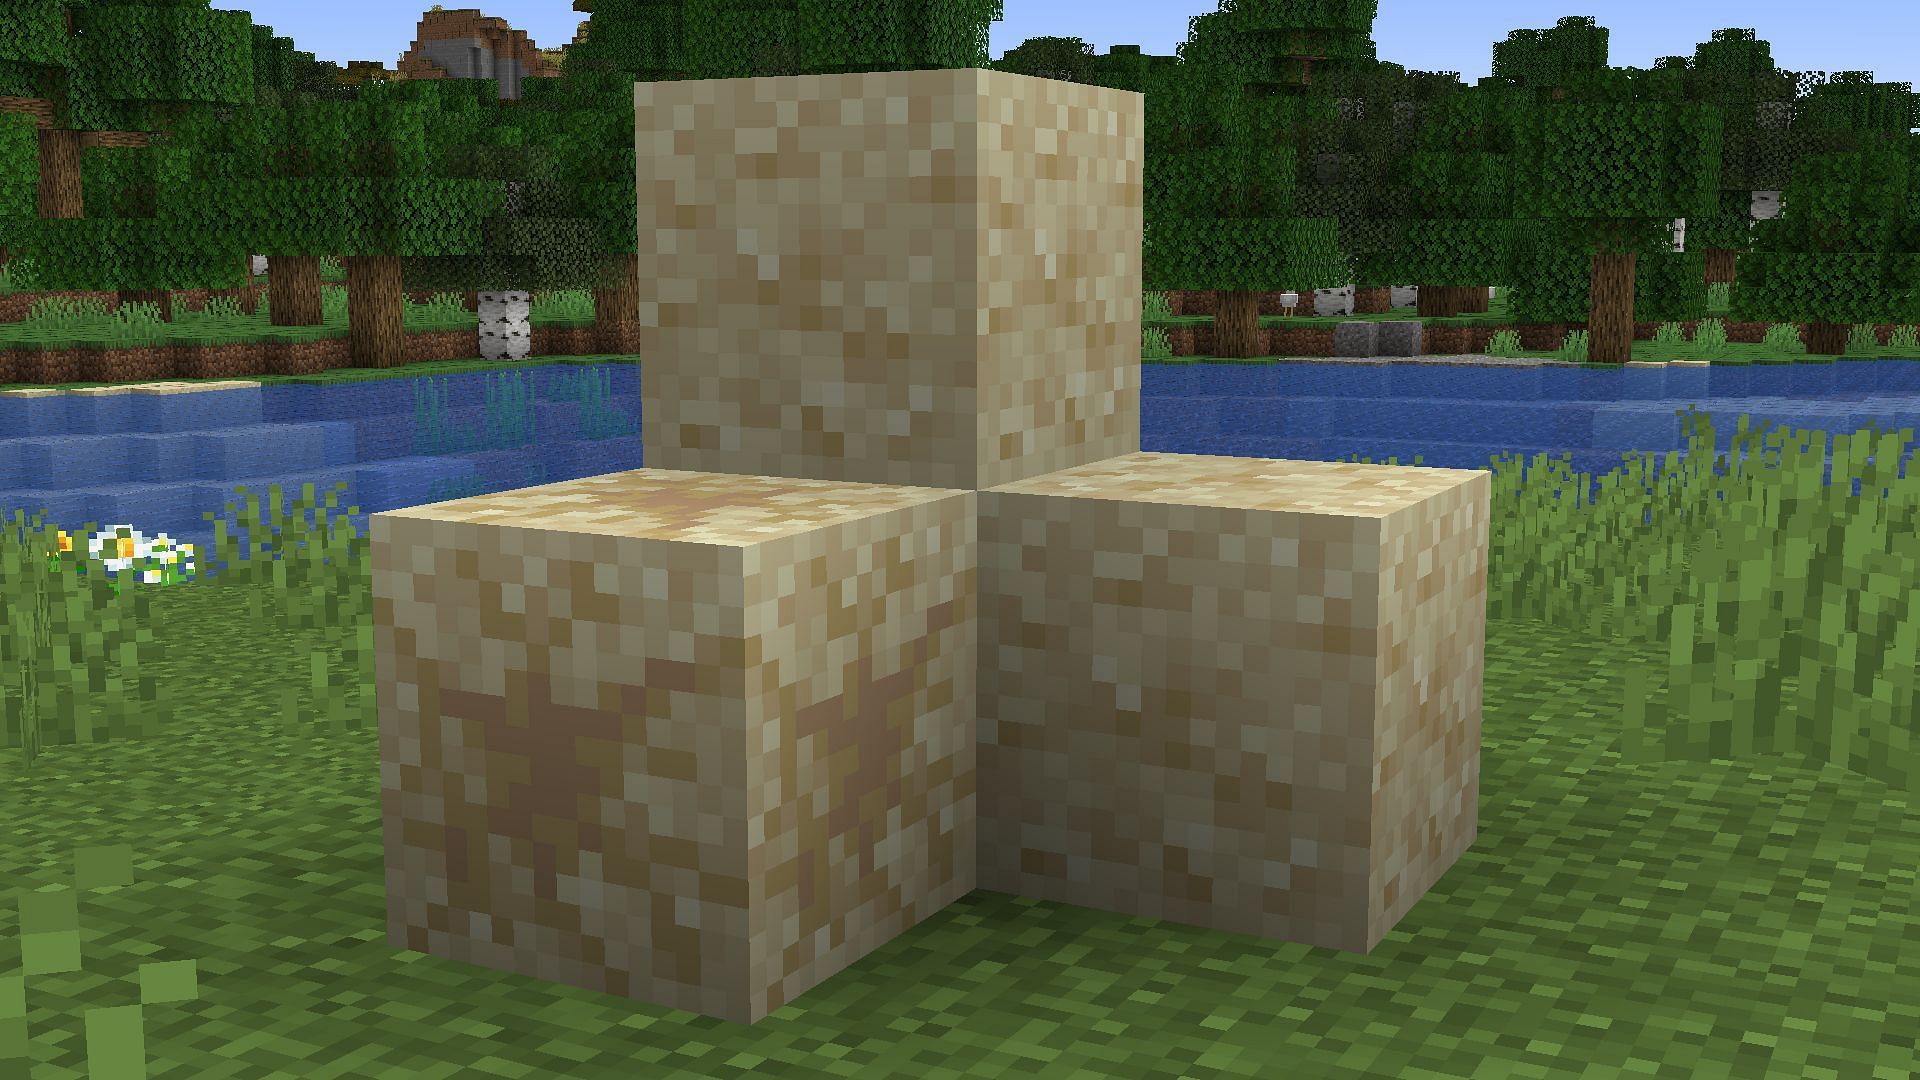 Sniffer eggs will now be found in suspicious sand blocks rather than in underwater ruin chests in Minecraft 1.20 update (Image via Mojang)